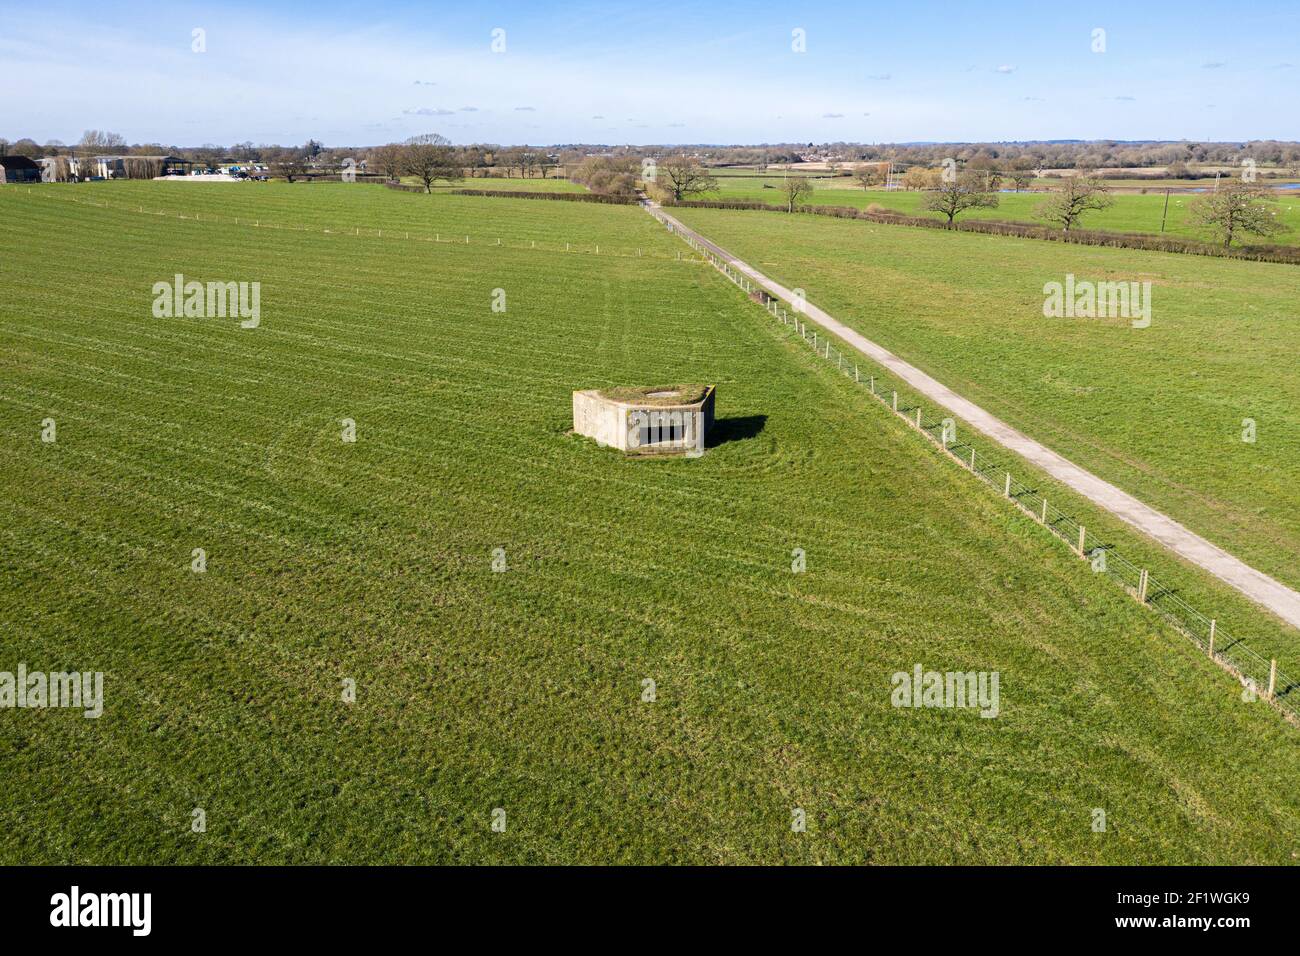 Pillbox bunker World War II anti tank bunker,  these bunkers were used for the defense of the United Kingdom against a possible enemy invasion. Stock Photo